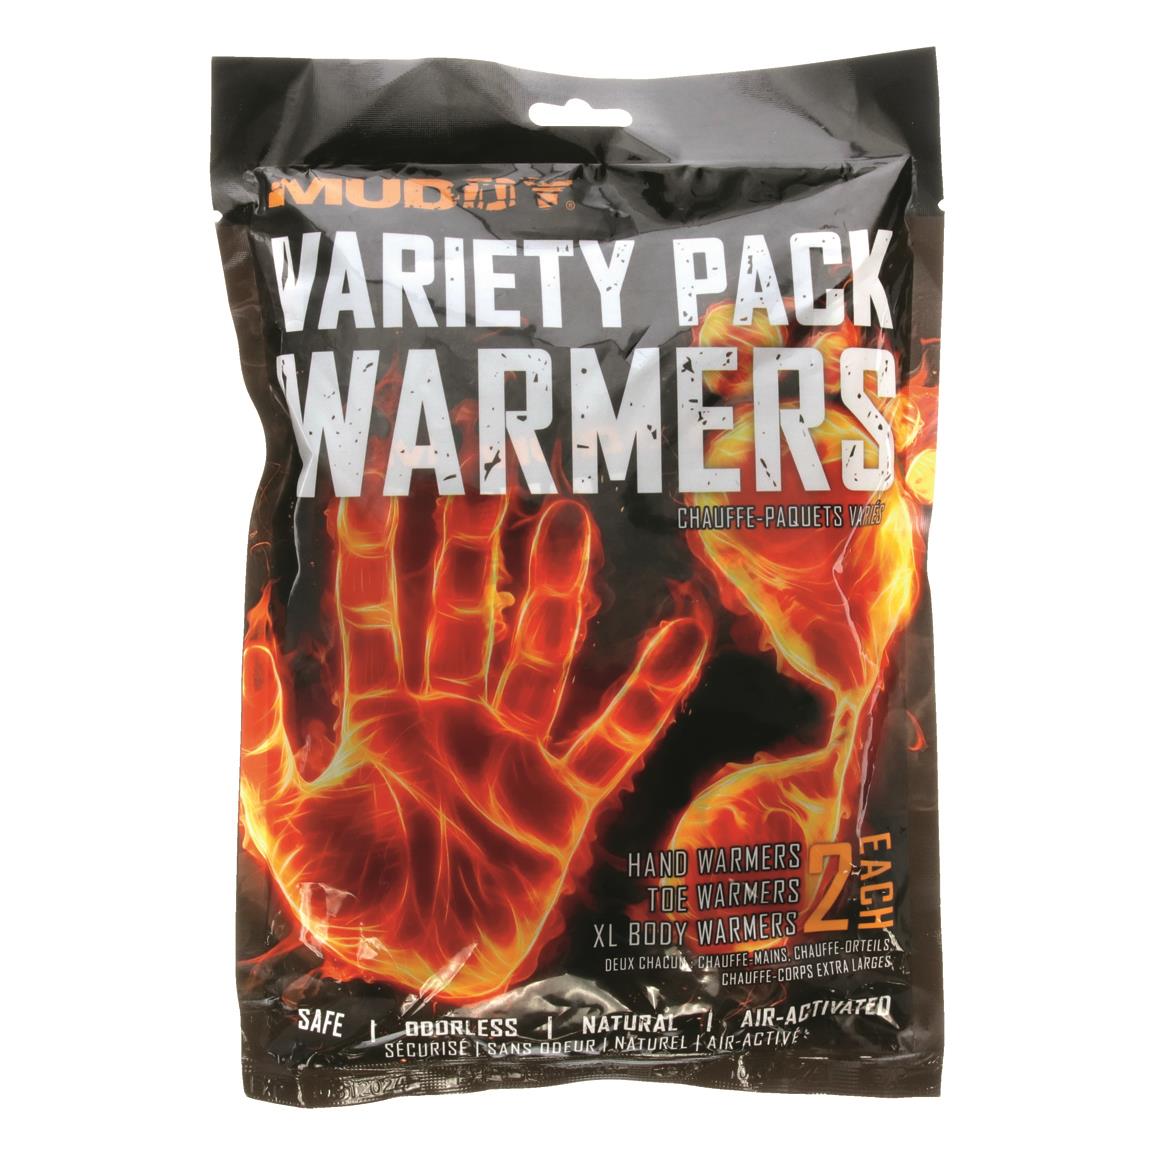 Muddy Disposable Hand Warmers - 2 Hand, 2 Toe, & 2 XL Warmers